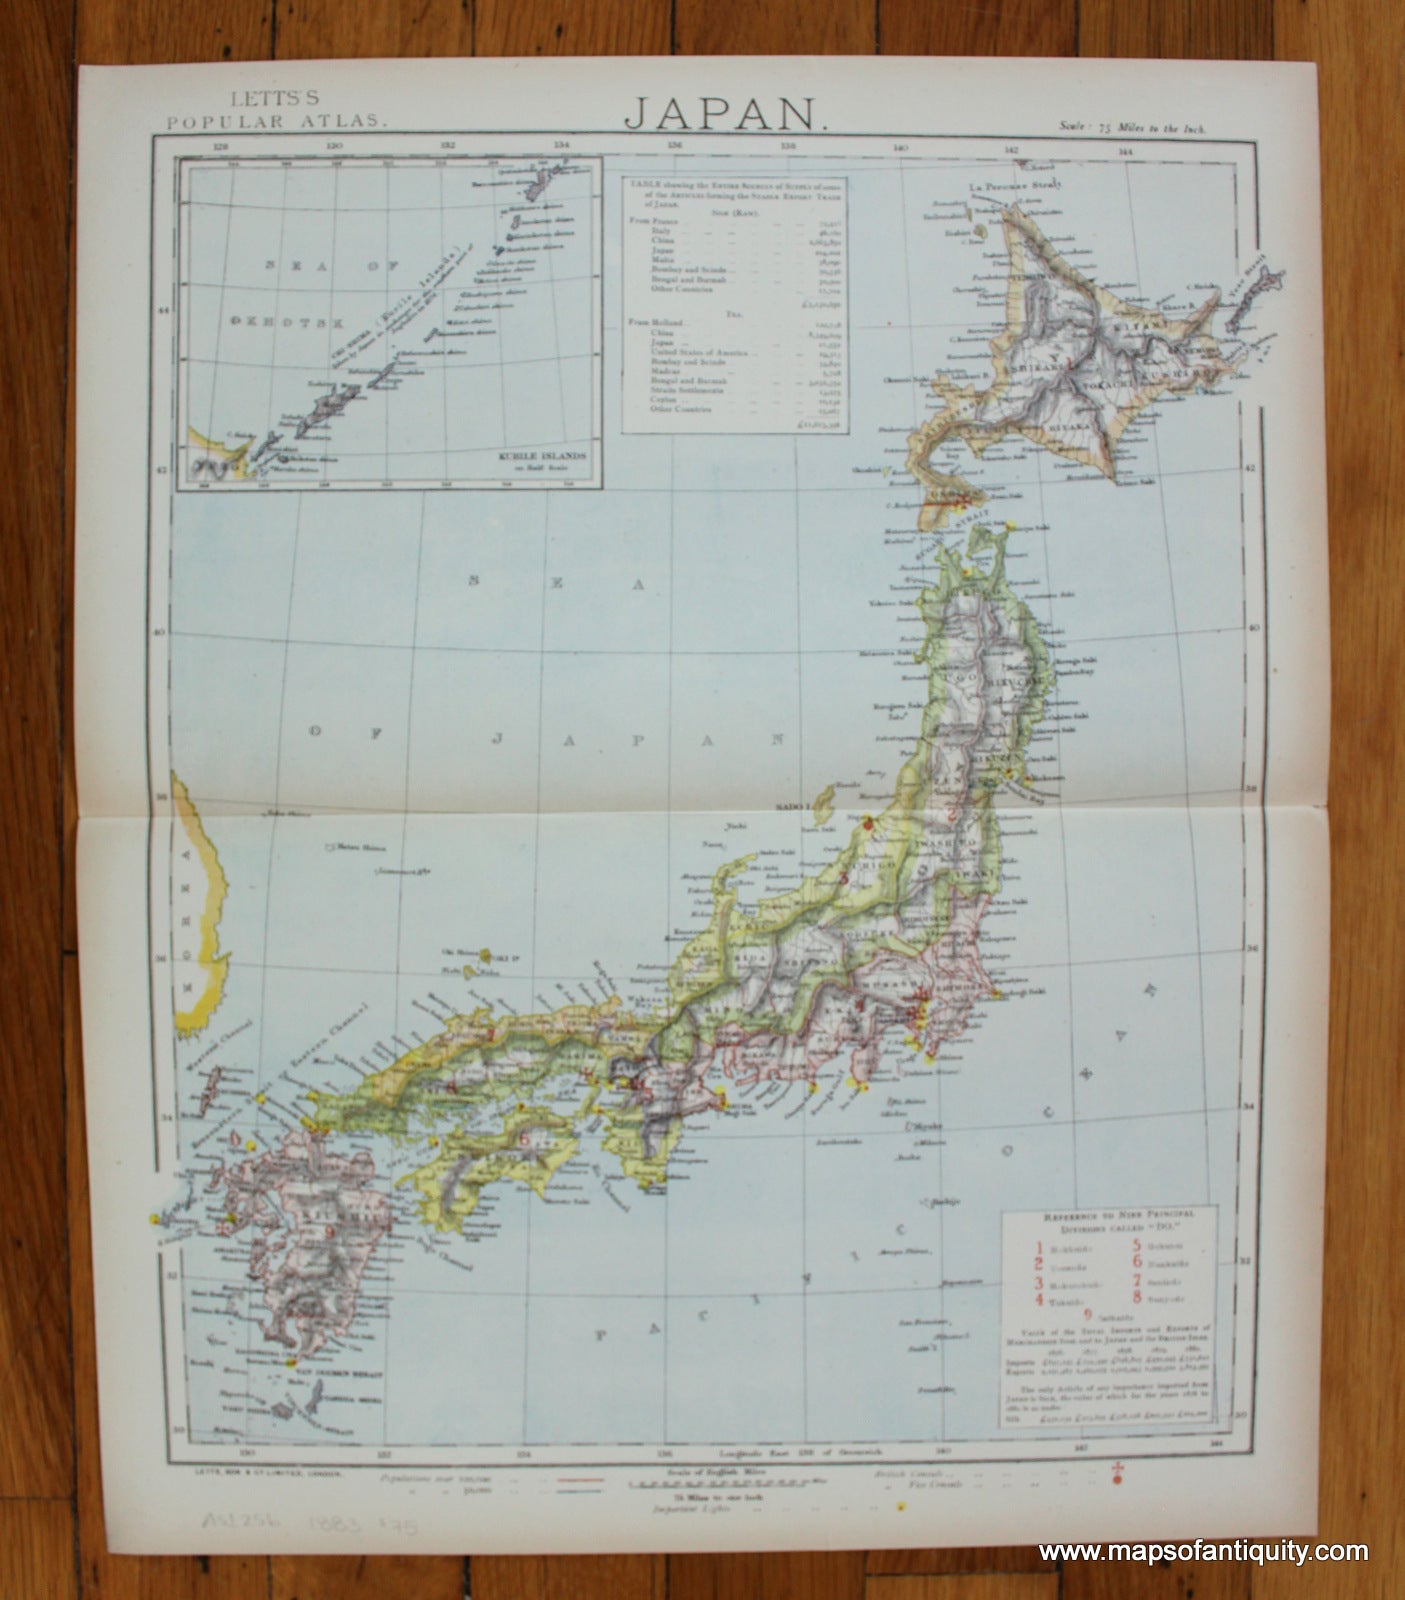 1883 - Japan - Antique Map – Maps of Antiquity